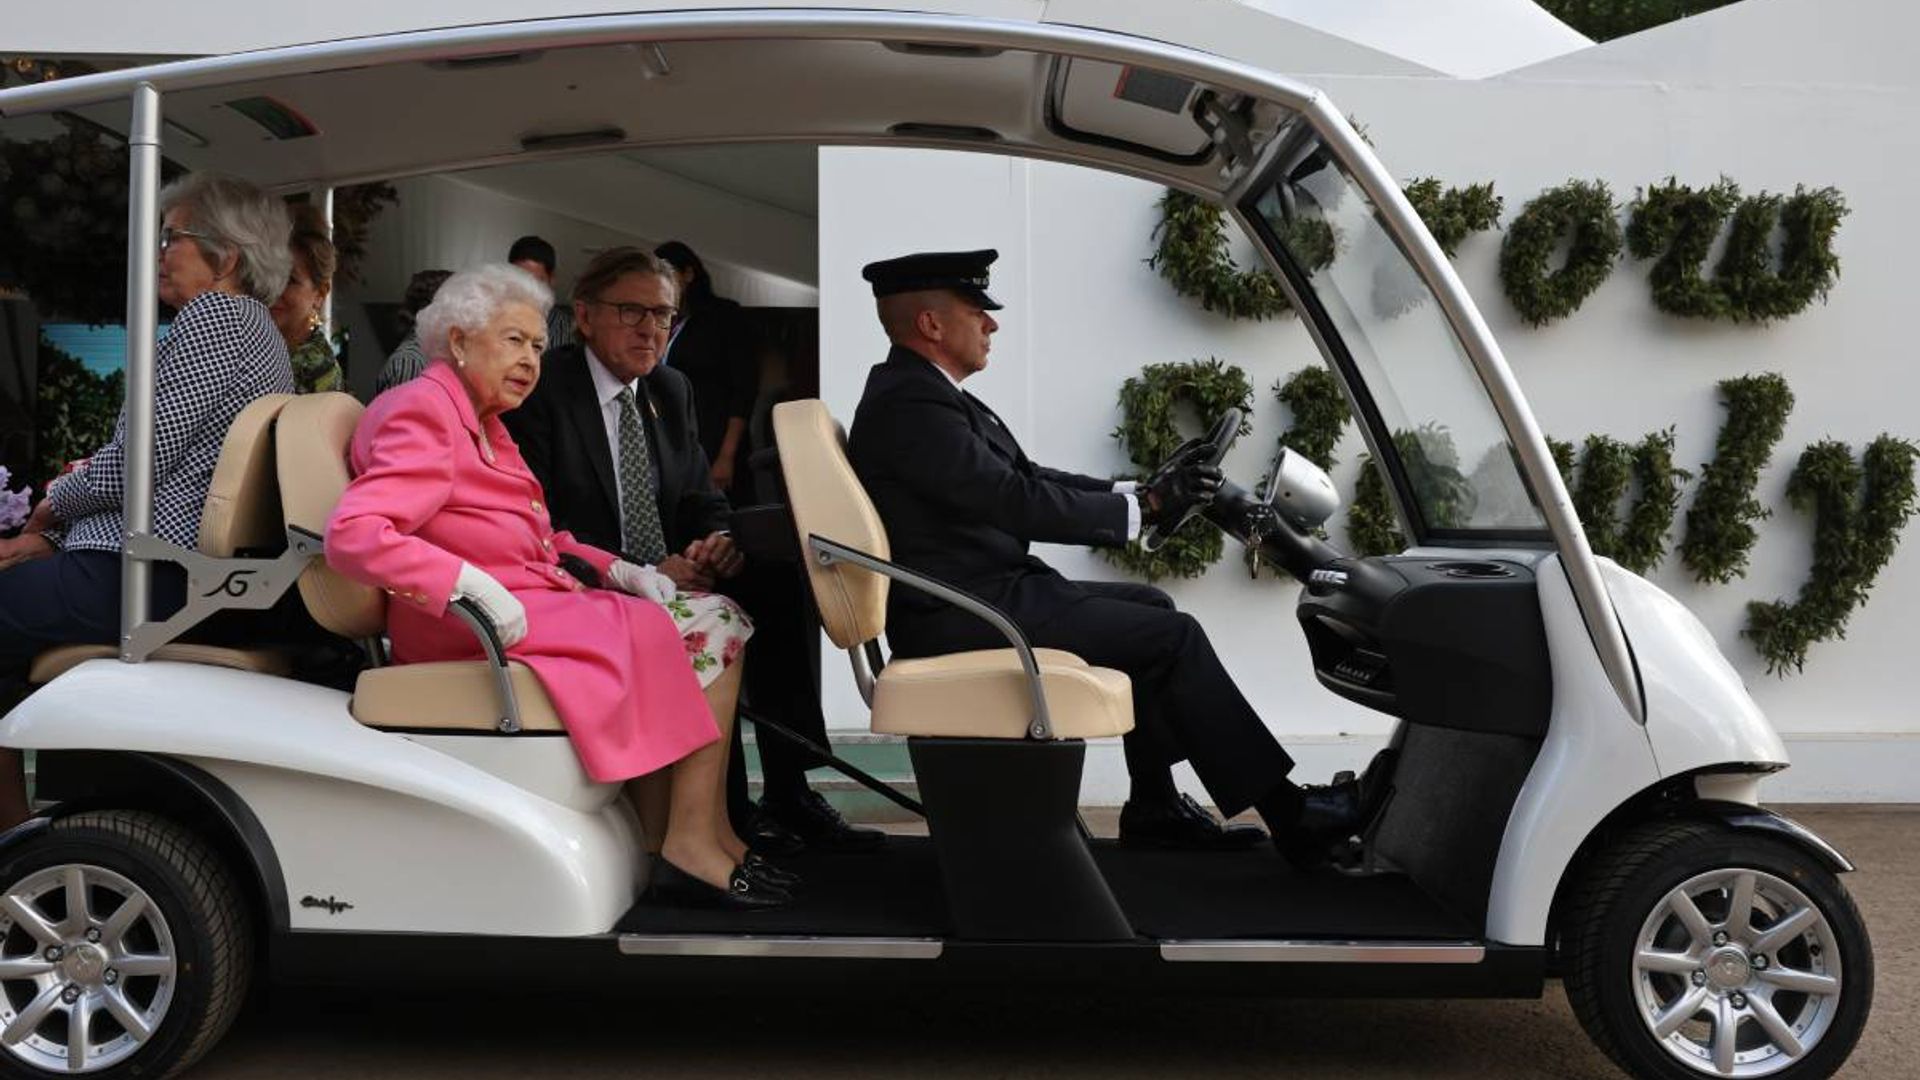 The Queen, 96, uses £62,000 buggy at Chelsea Flower Show amid mobility issues – LIVE UPDATES